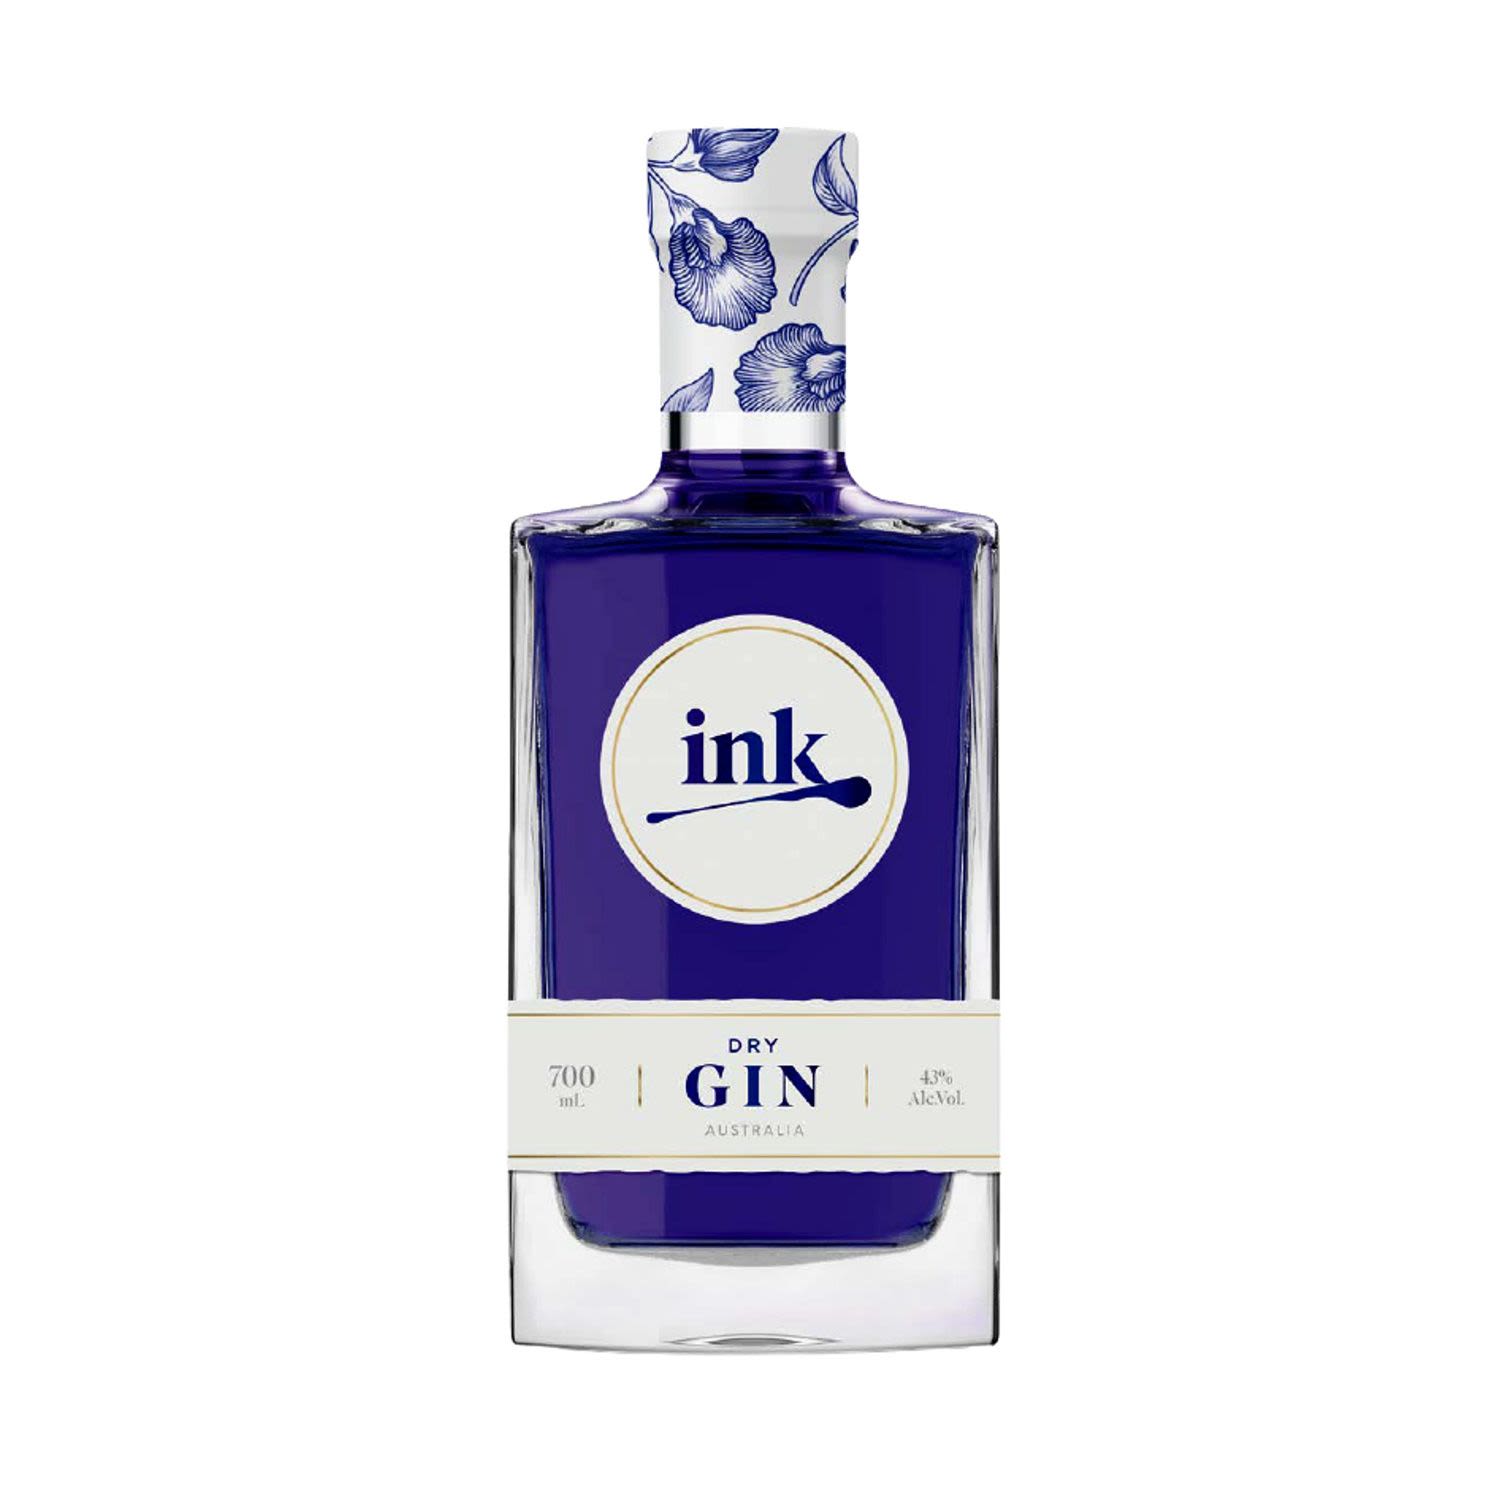 Ink Gin was created in the Northern Rivers of NSW after a global voyage of botanical discovery. This natural floral infusion of Butterfly Pea Flower petals gives Ink Dry Gin a remarkable and lustrous inky blue hue. Visually beautiful with changes of colour from deep blue to blush pink when mixed with tonic water or a splash of lemon juice. Distilled with a blend of traditional and exotic ingredients, the flavour of juniper, native lemon myrtle, Tasmanian pepper berries and sweet orange make for a aromatic and full flavoured experience. Husk Distillers is a family owned craft distillery based on the family farm in Tumbulgum, Tweed Valley. Australia's only plantation rum distillery, the Messenger family & the Husk Distillers team focus on creating innovative & unique spirits using local, exotic & organic ingredients with a 'paddock to bottle' approach.<br /> <br />Alcohol Volume: 43.00%<br /><br />Pack Format: Bottle<br /><br />Standard Drinks: 23.7</br /><br />Pack Type: Bottle<br /><br />Country of Origin: Australia<br />